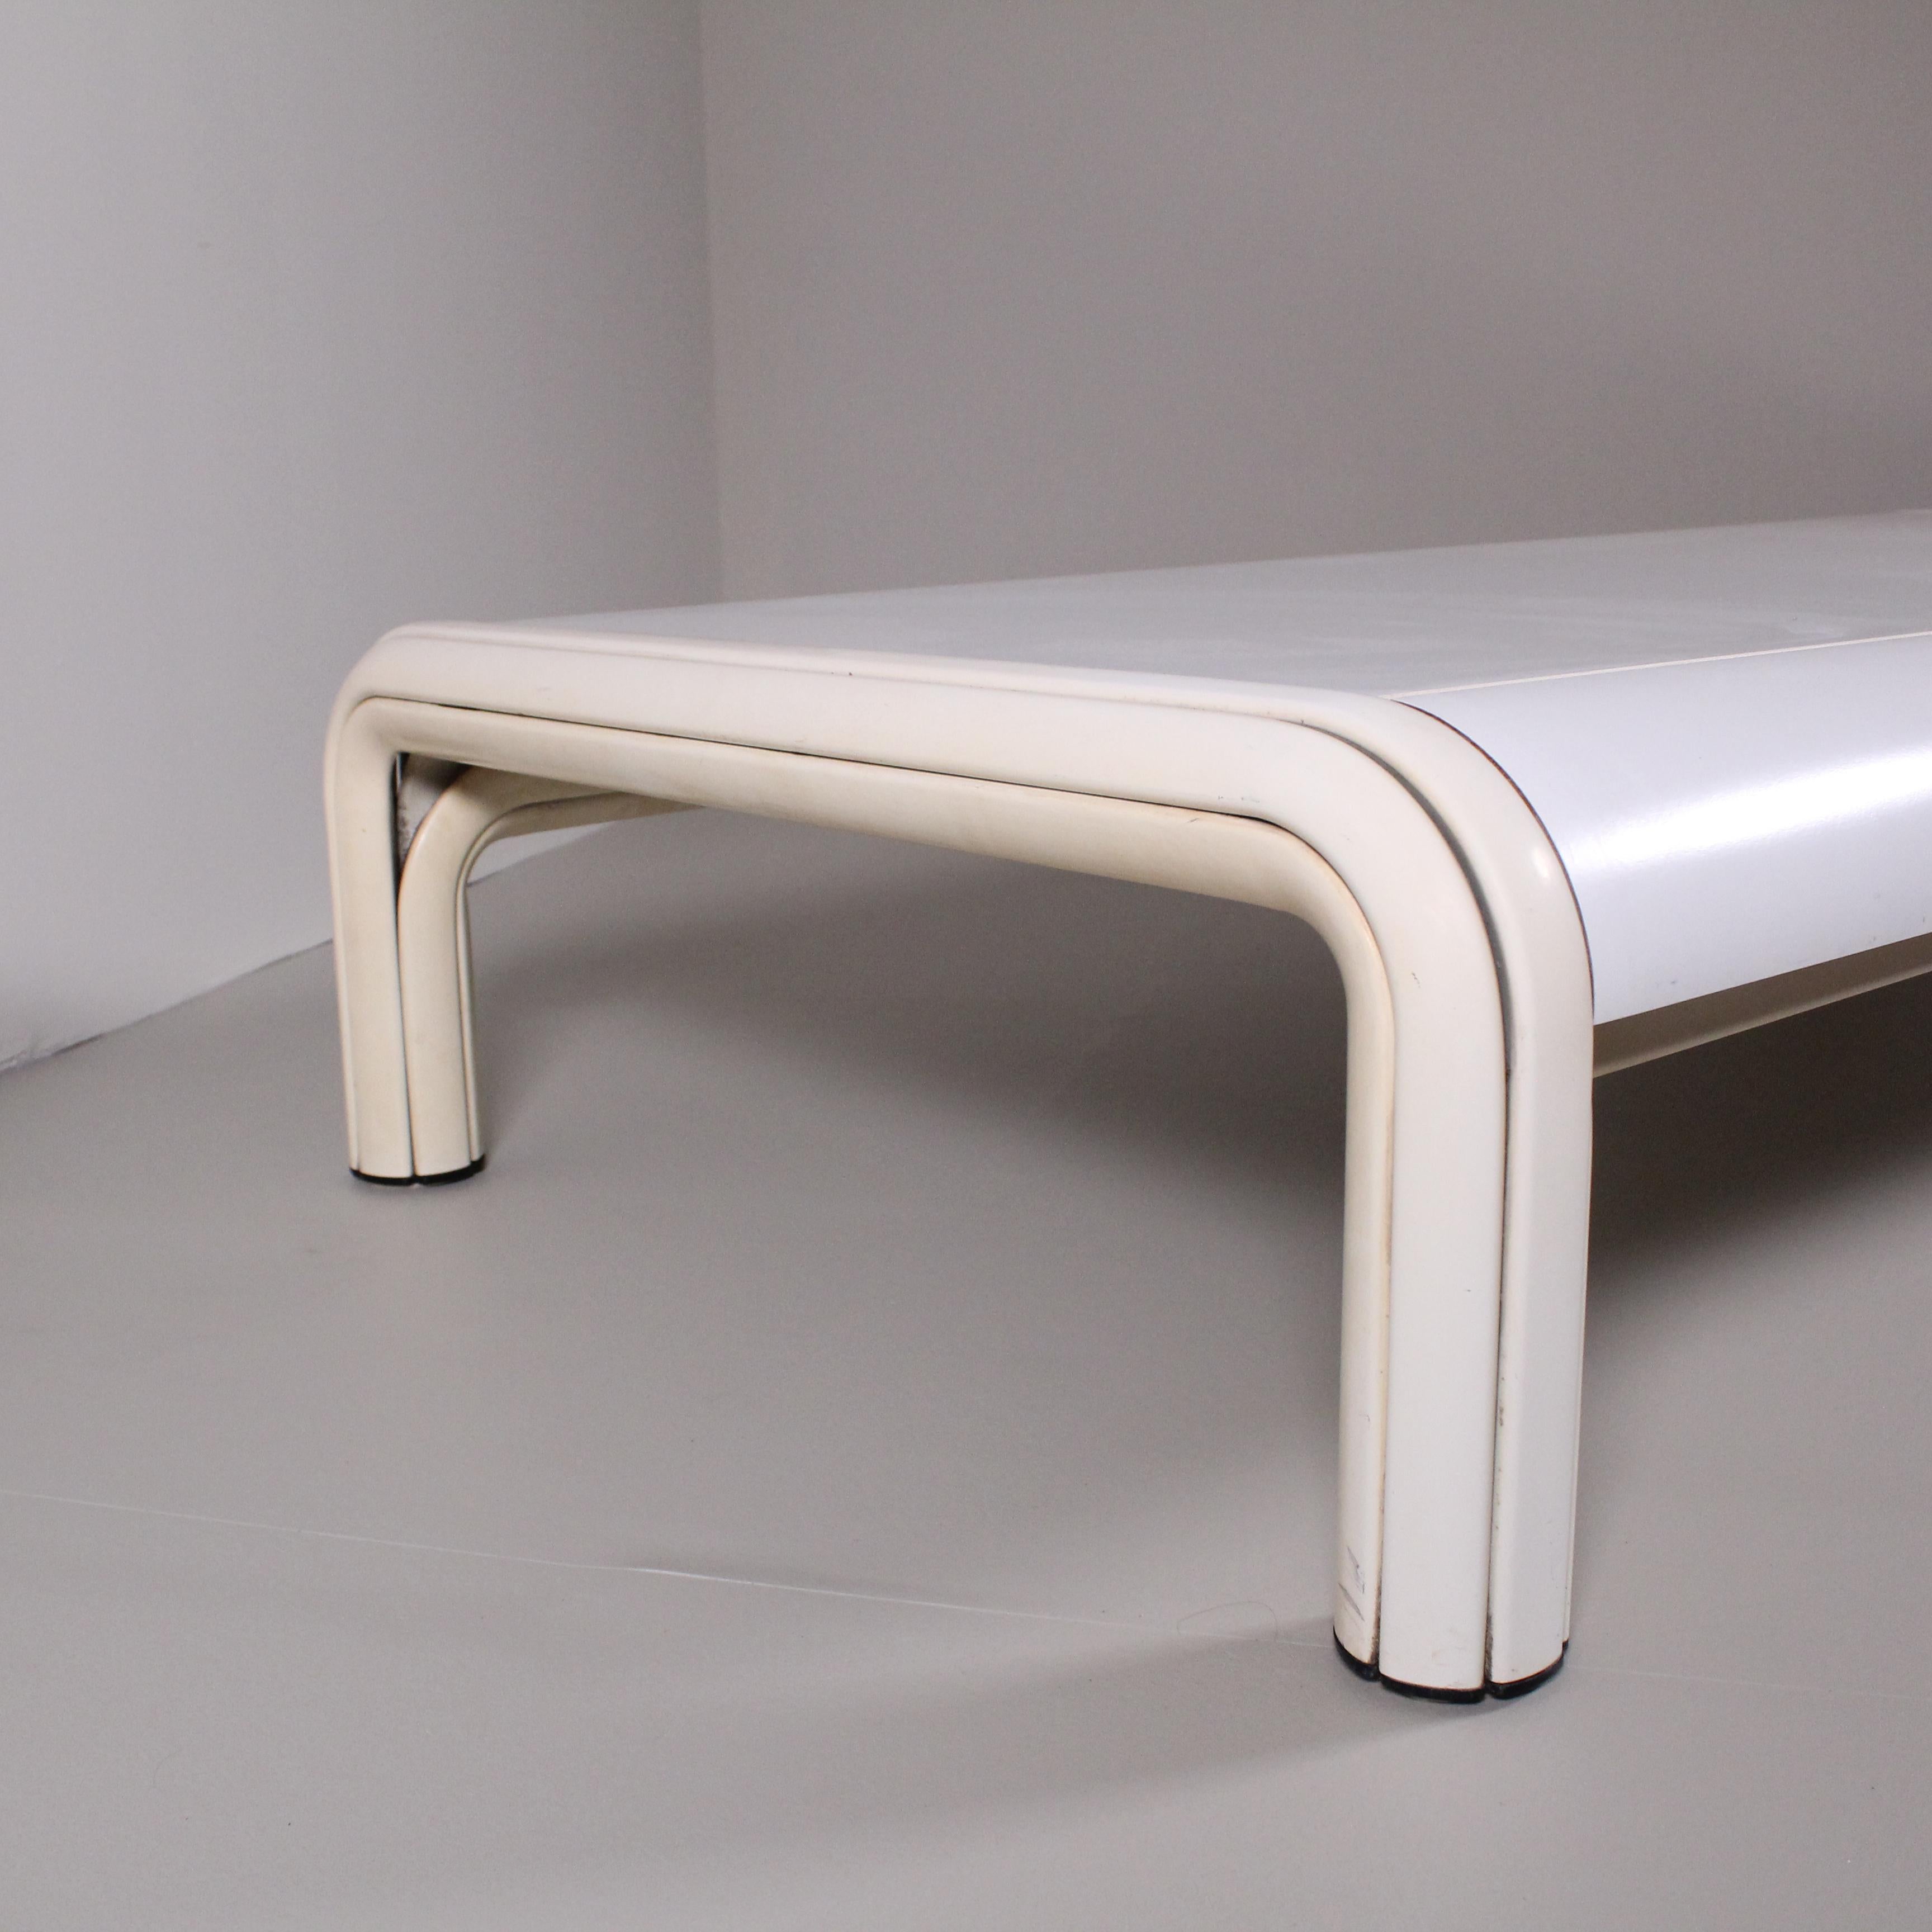 Late 20th Century Orsay coffee table, Gae Aulenti, Knoll, 1970 circa For Sale